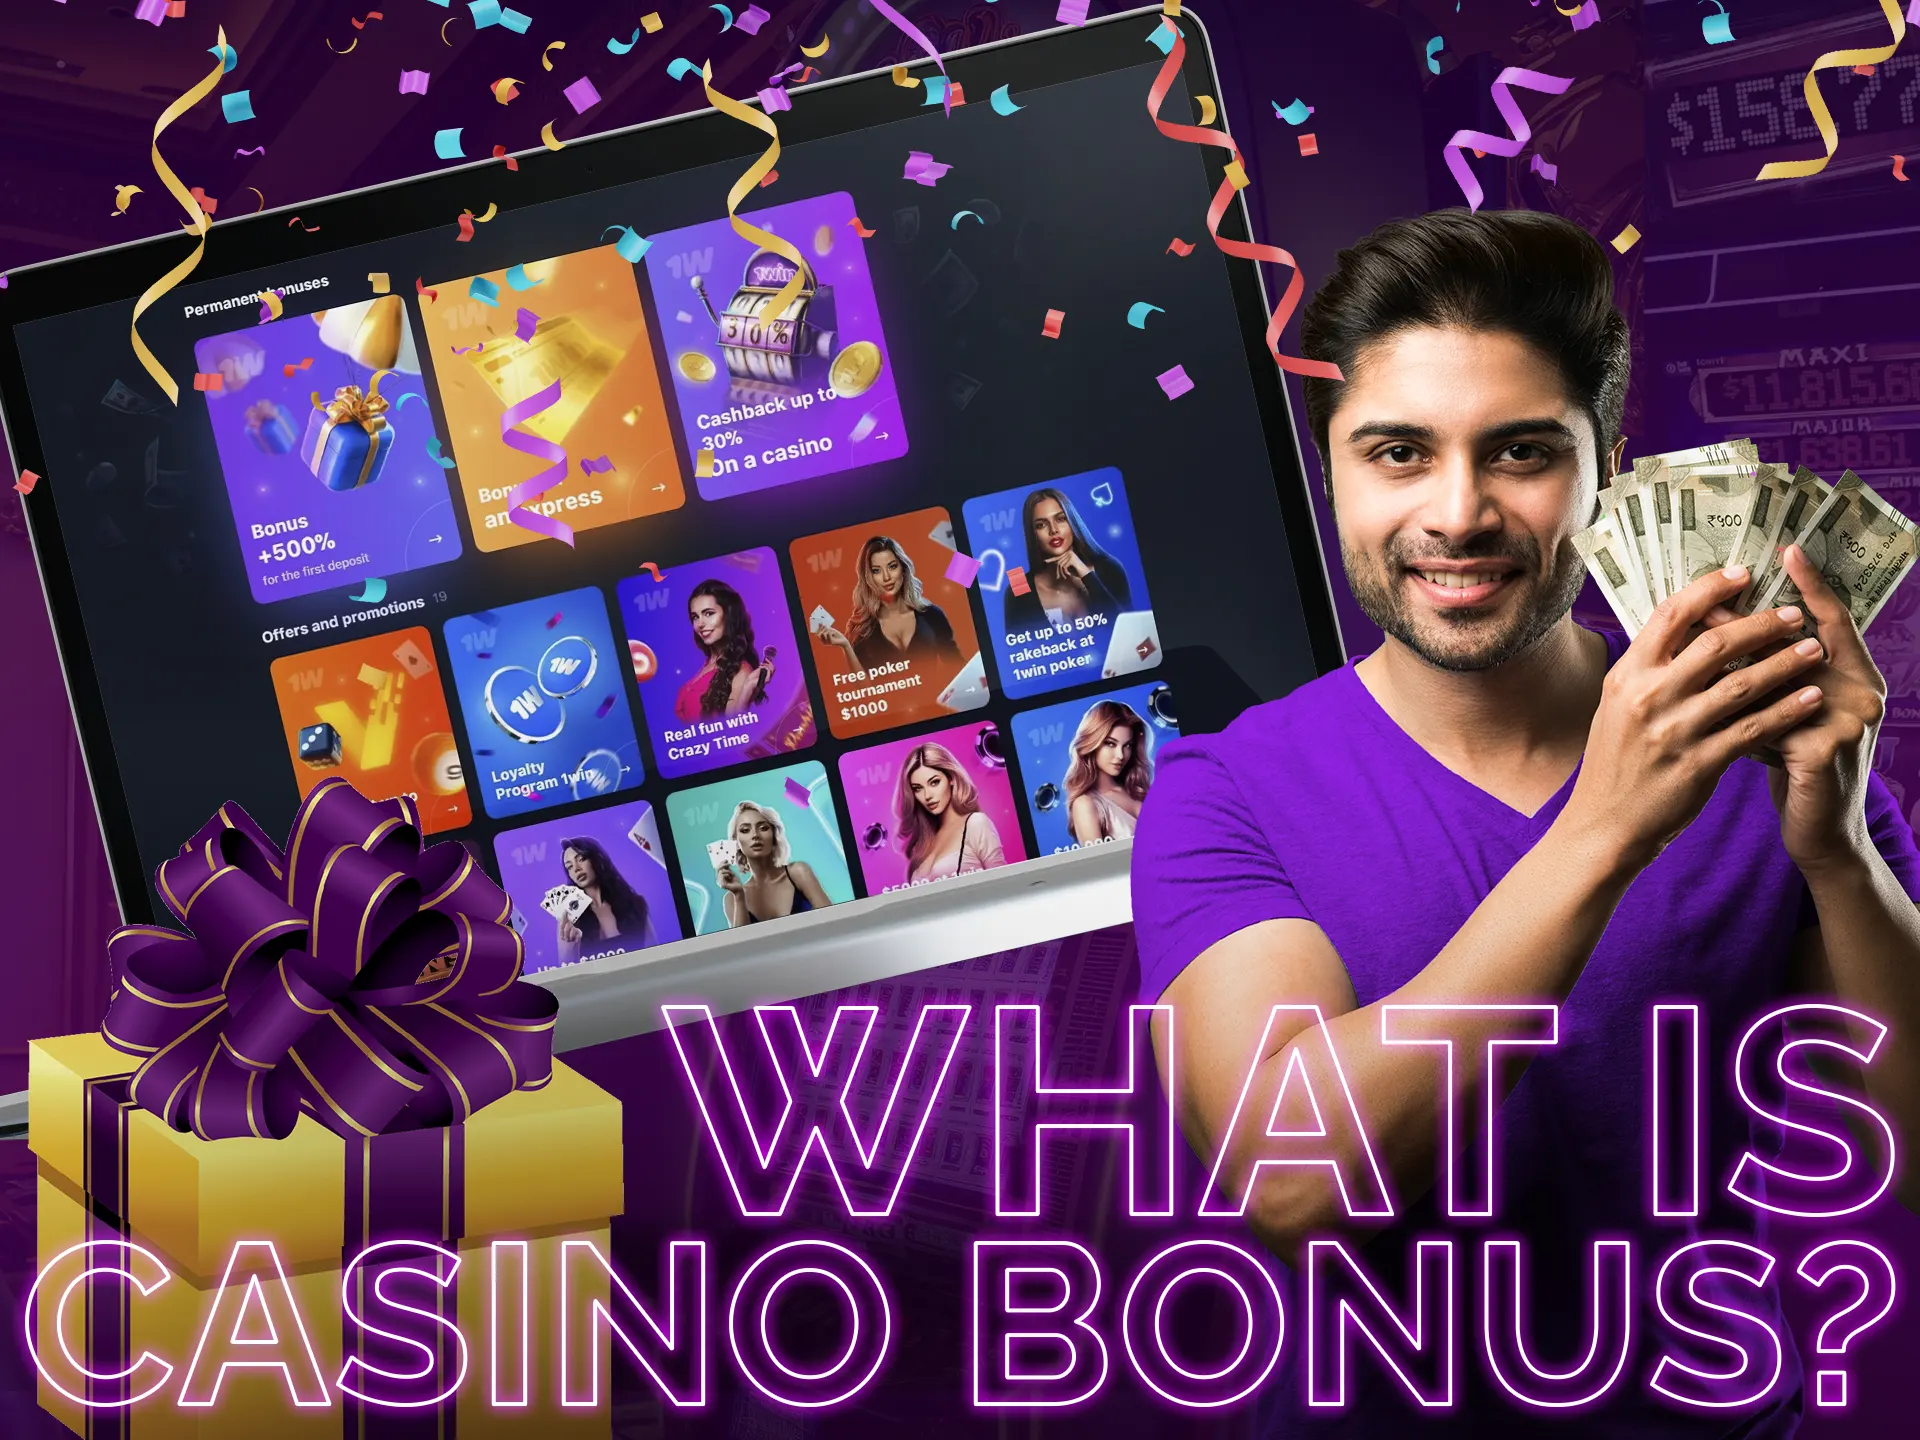 Online casino bonuses enhance winning odds, extend playtime, and potentially increase earnings, benefiting gamers.